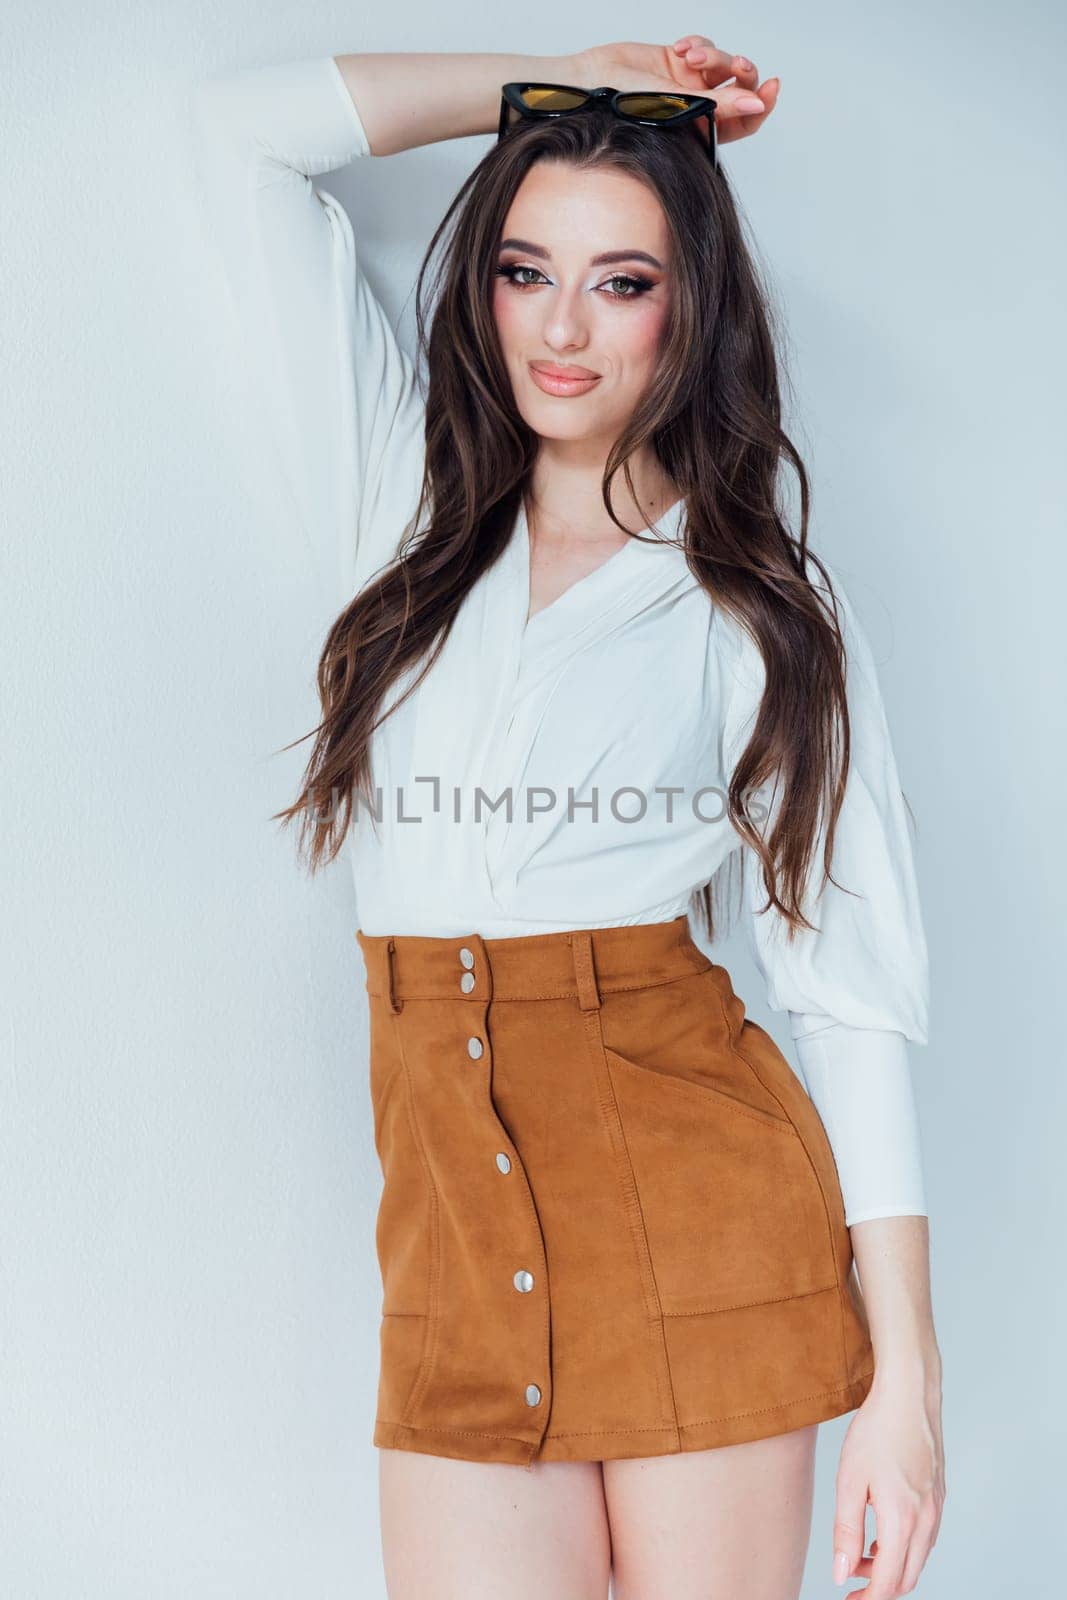 Beautiful fashionable woman in blouse and yellow skirt on white background